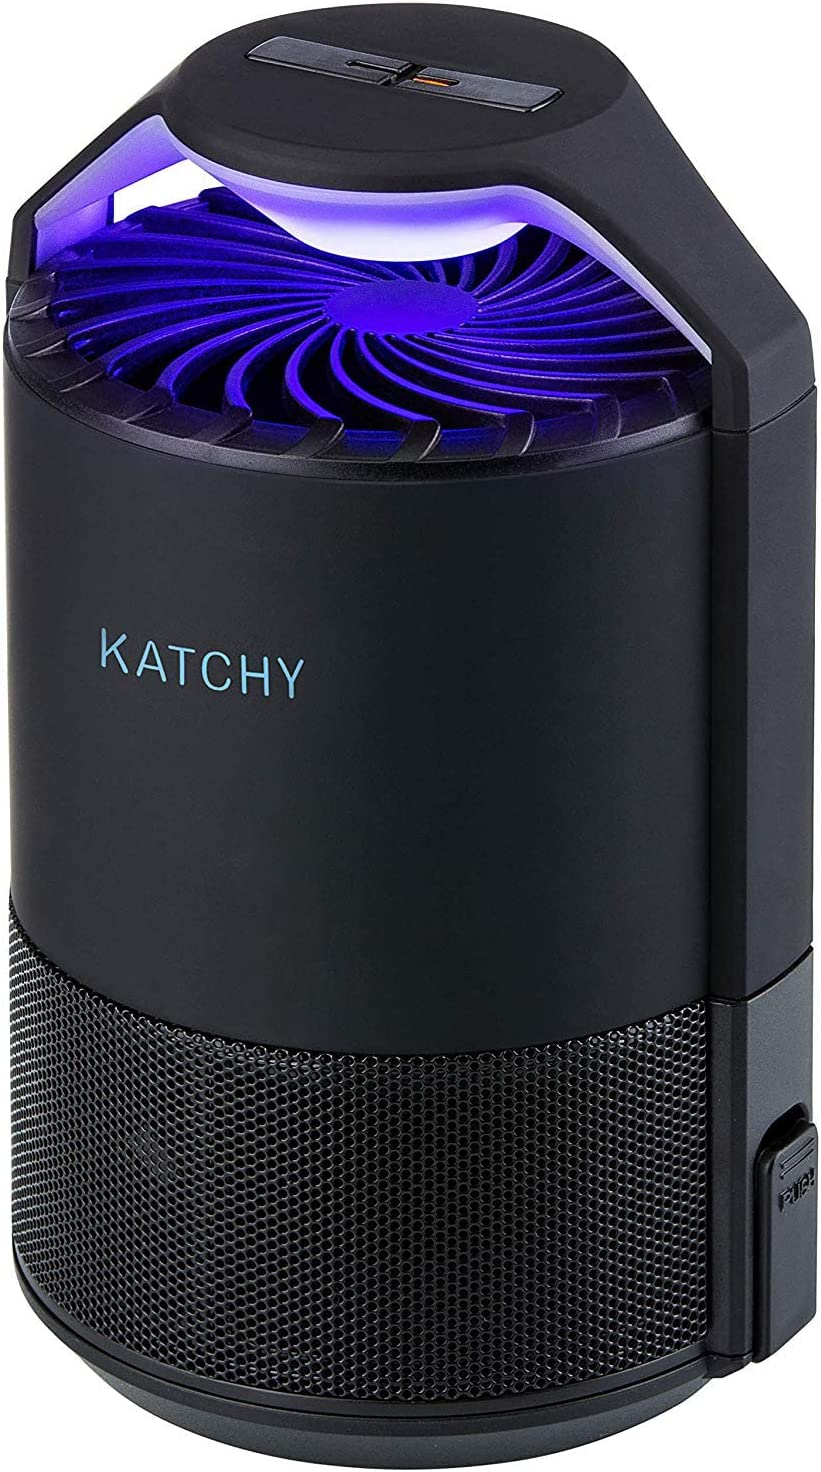 https://discounttoday.net/wp-content/uploads/2022/09/Katchy-Indoor-Insect-Trap-Catcher-Killer-for-Mosquitos-Gnats-Moths-Fruit-Flies-Non-Zapper-Traps-for-Inside-Your-Home-Catch-Insects-Indoors-with-Suction-Bug-Light-Sticky-Glue-Black.jpg